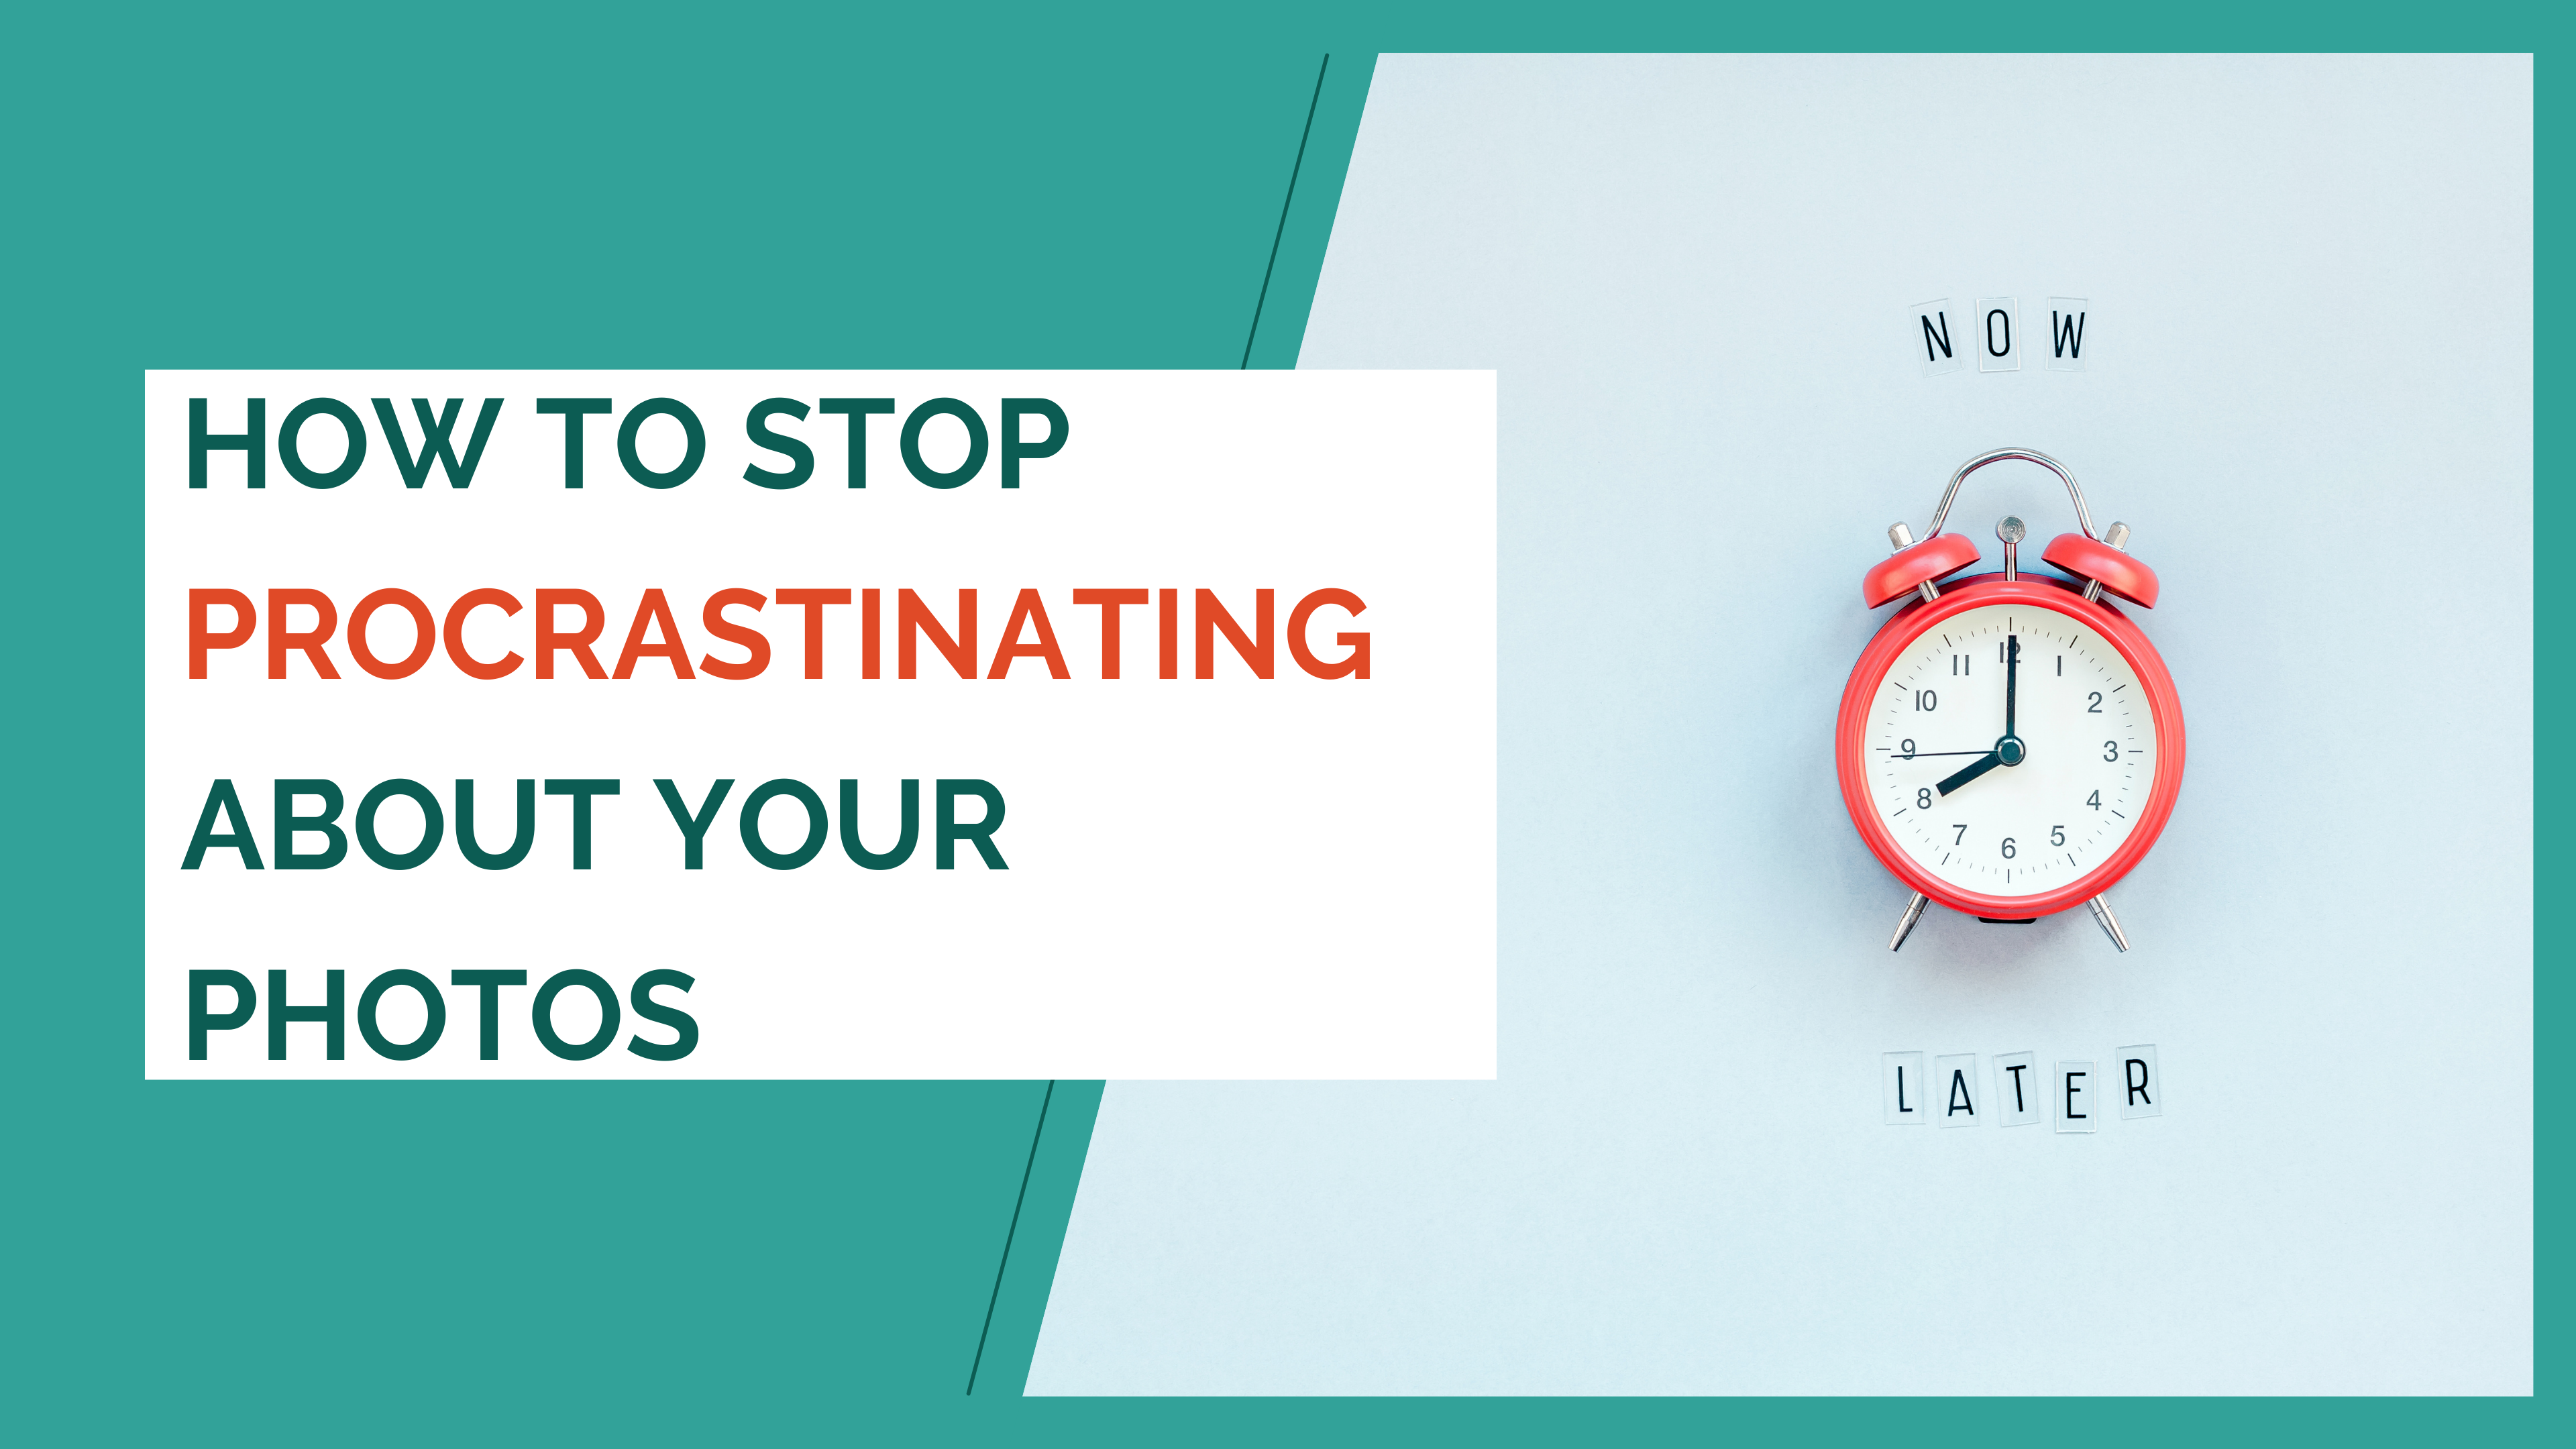 How to stop procrastinating about your photos